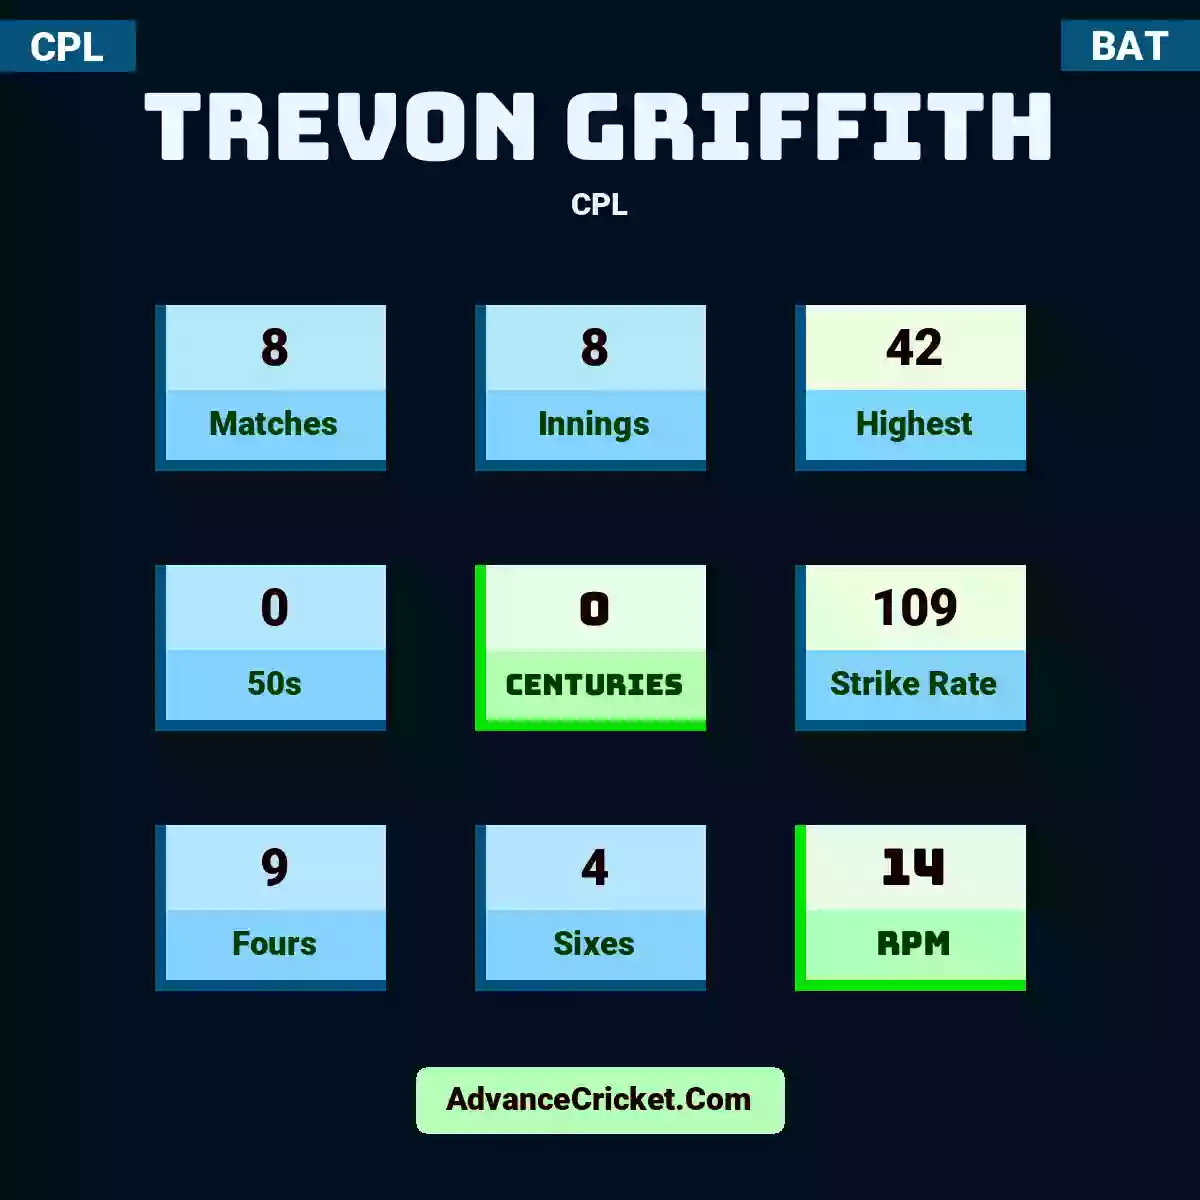 Trevon Griffith CPL , Trevon Griffith played 8 matches, scored 42 runs as highest, 0 half-centuries, and 0 centuries, with a strike rate of 109. T.Griffith hit 9 fours and 4 sixes, with an RPM of 14.